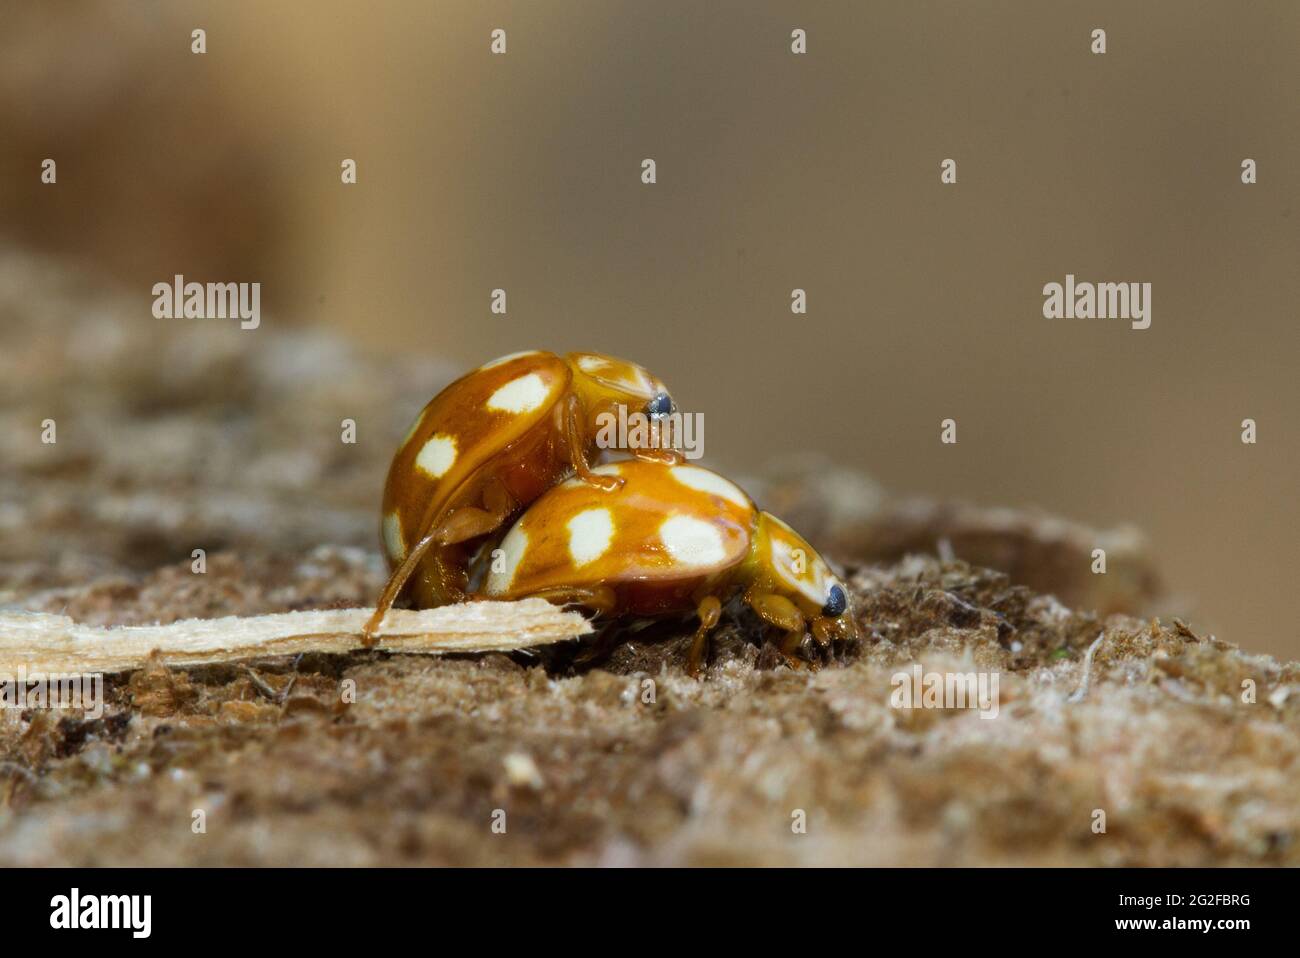 Mating Ten-spot ladybirds, spotted yellow-brown beetles Stock Photo